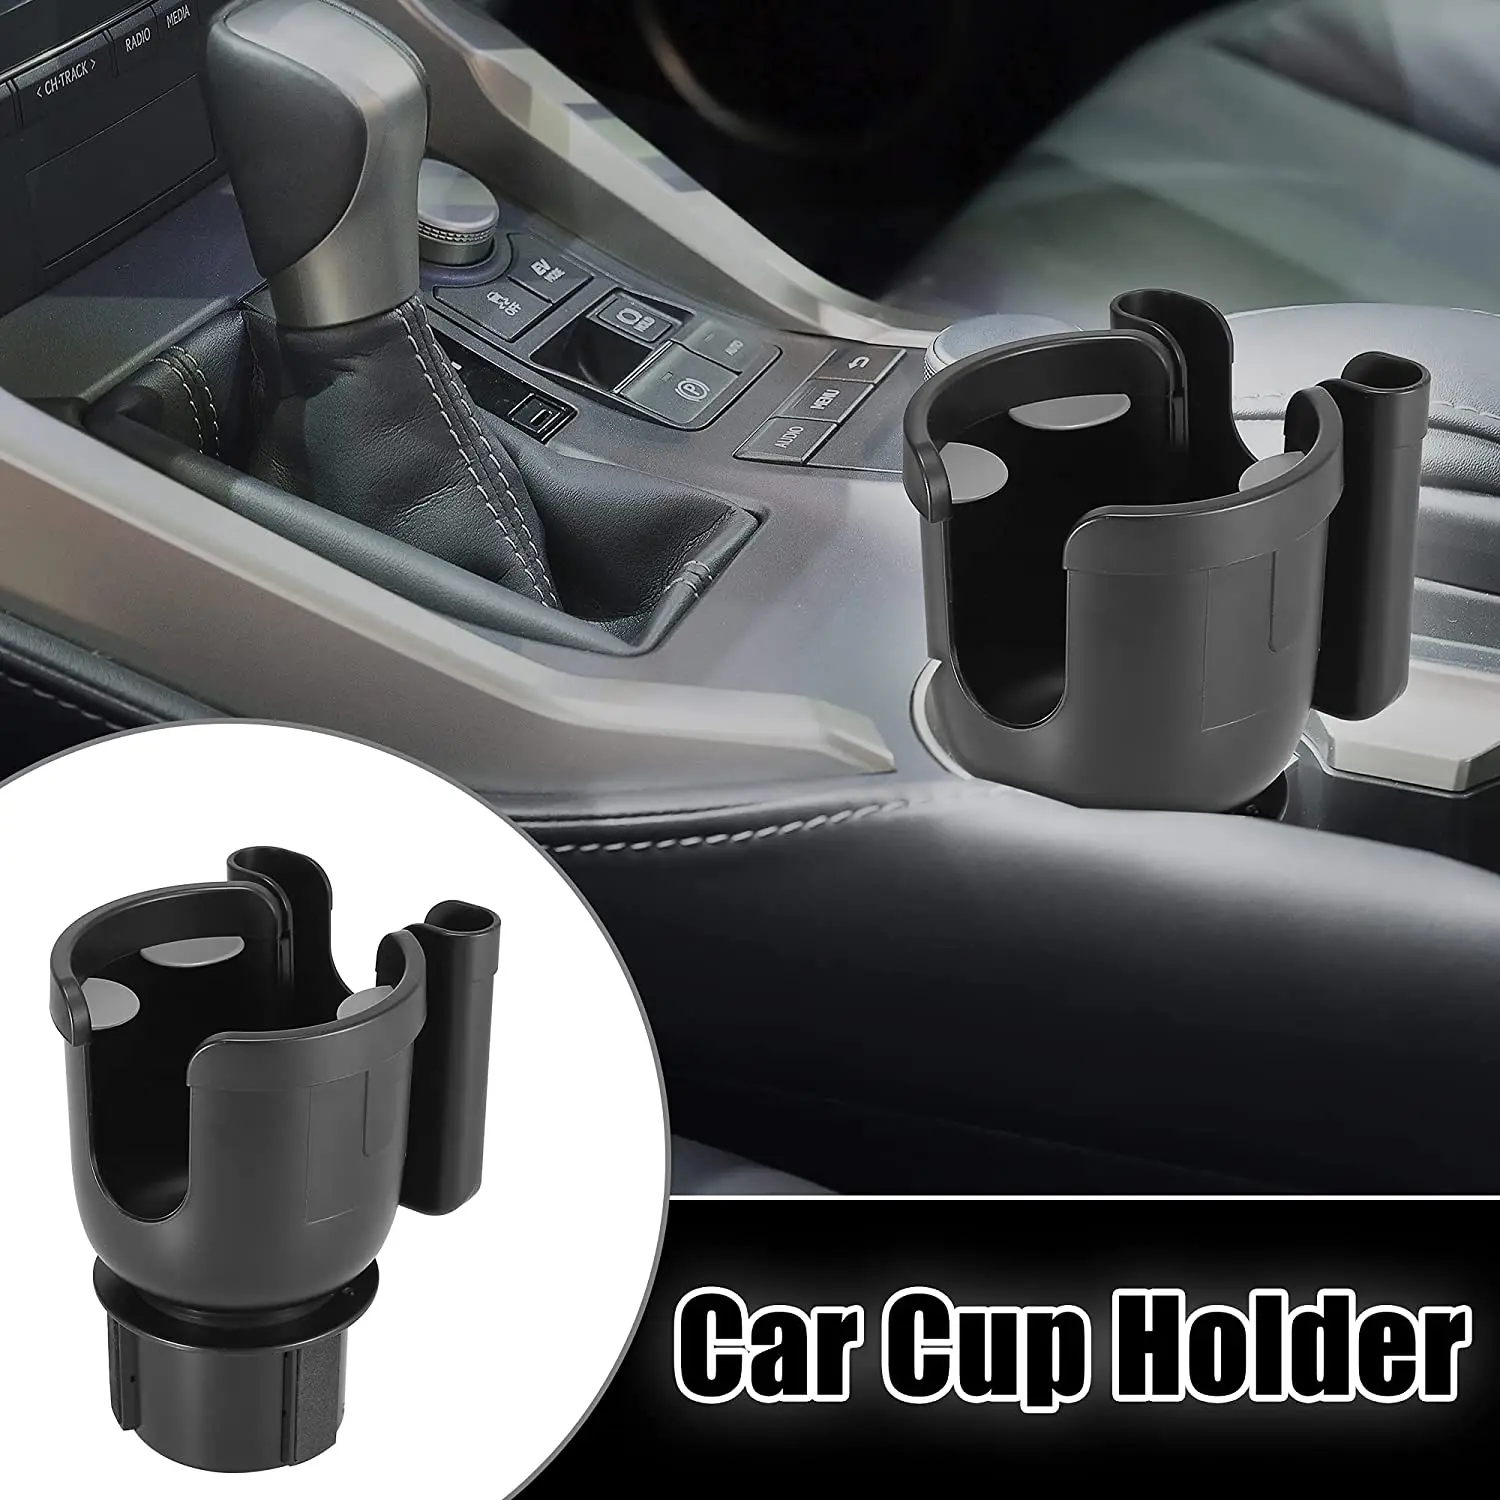 Car Cup Holder Expander Cupholder Adapter Multipurpose Auto Interior  Expandable Organizer Storage Accessories With Phone Holder - AliExpress